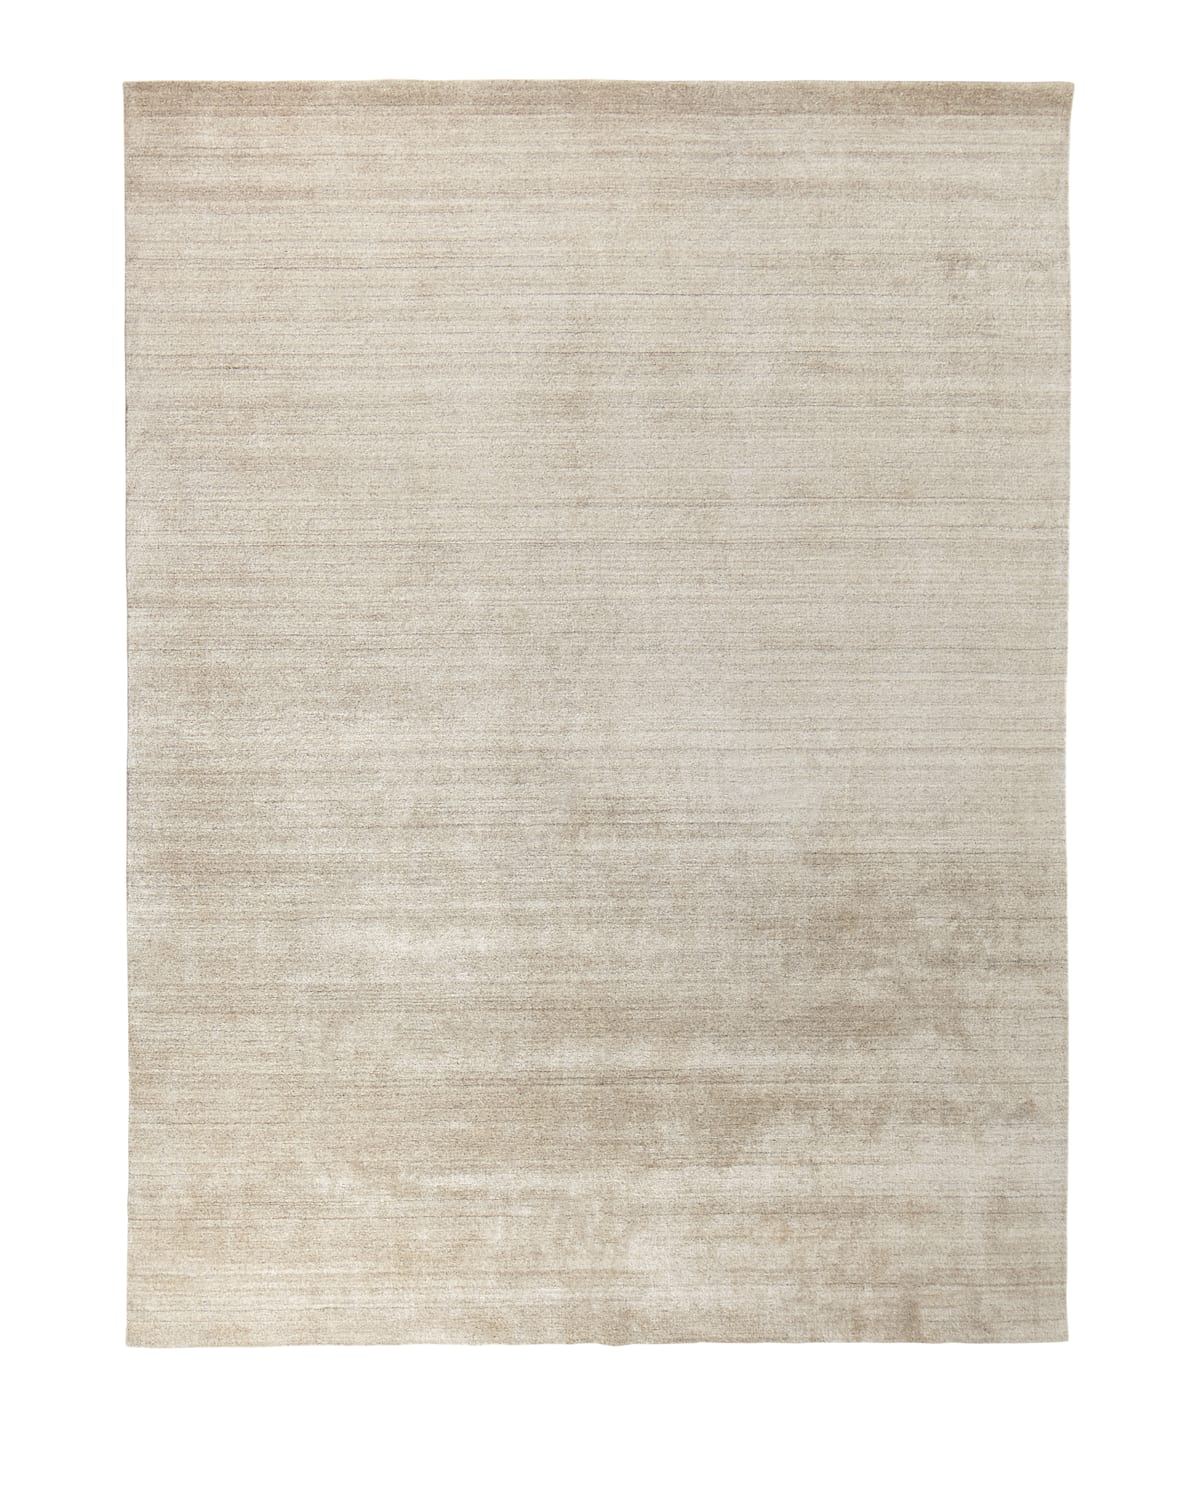 Exquisite Rugs Thames Rug, 8' X 10'